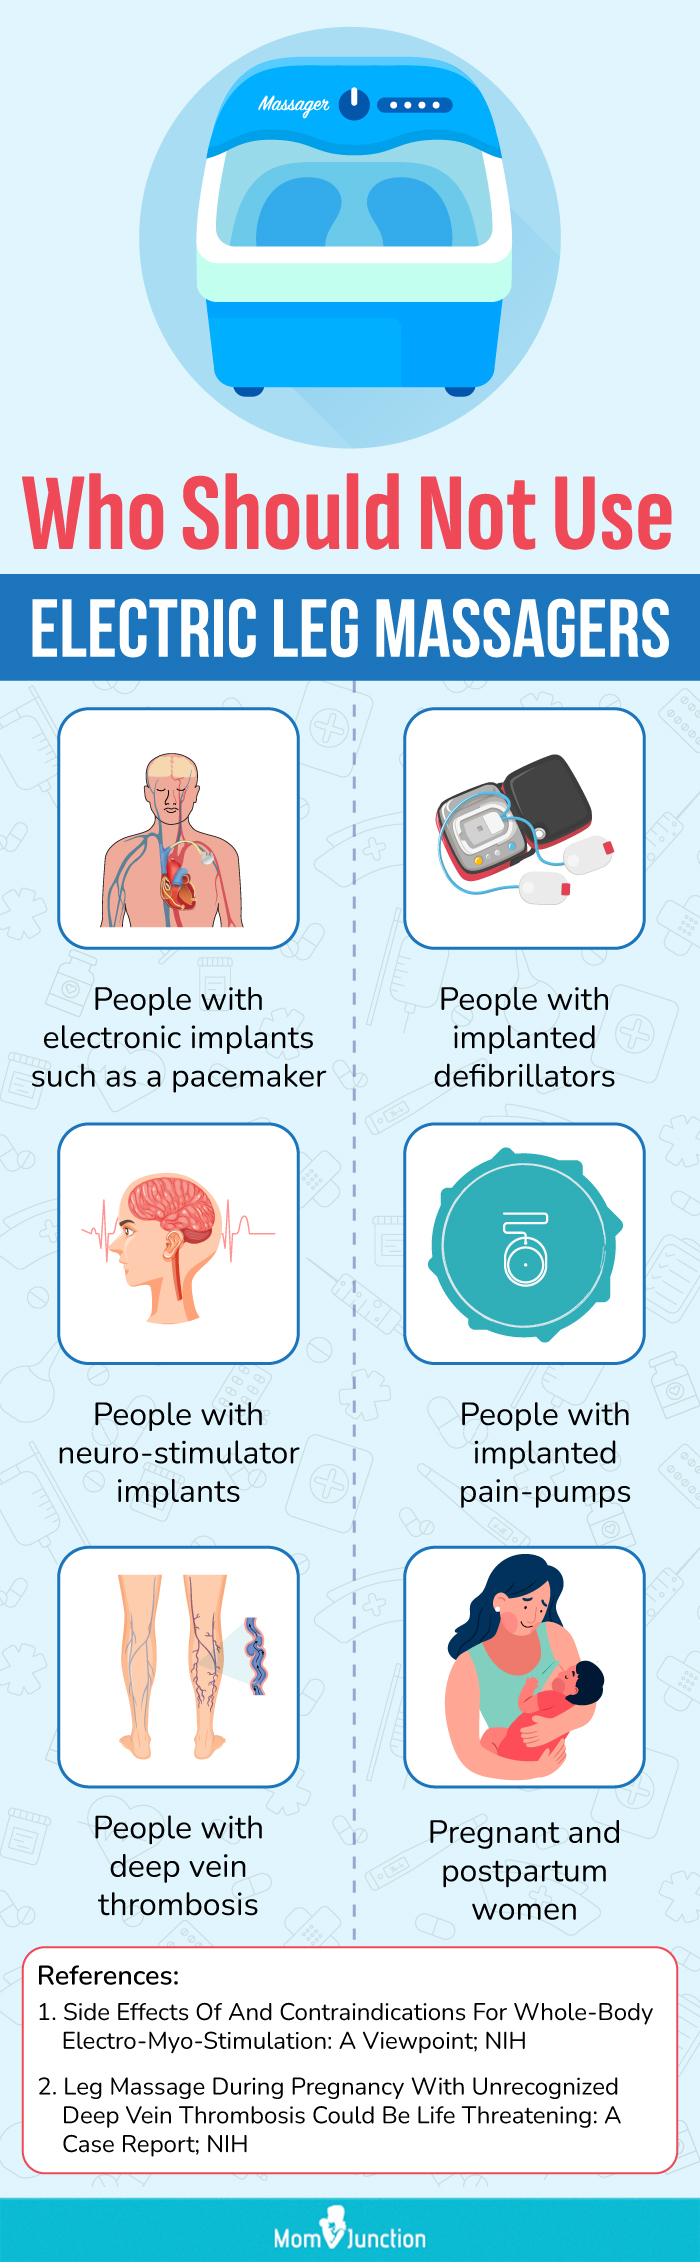 Who Should Not Use Electric Leg Massagers (infographic)